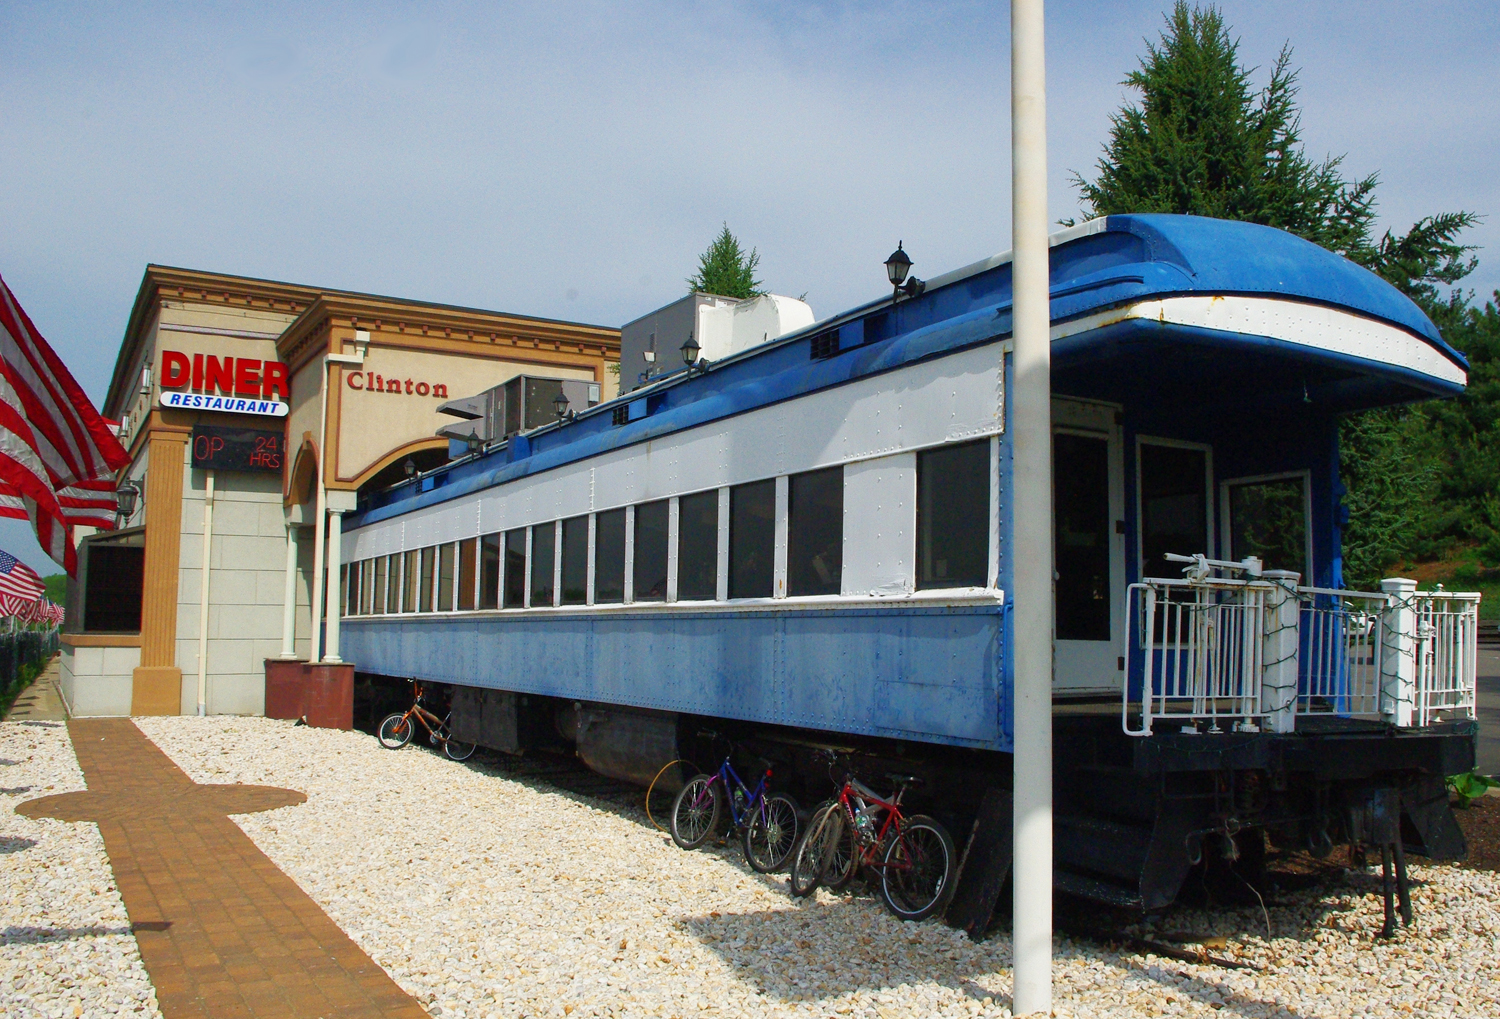 The Railroad Dining Car Diner